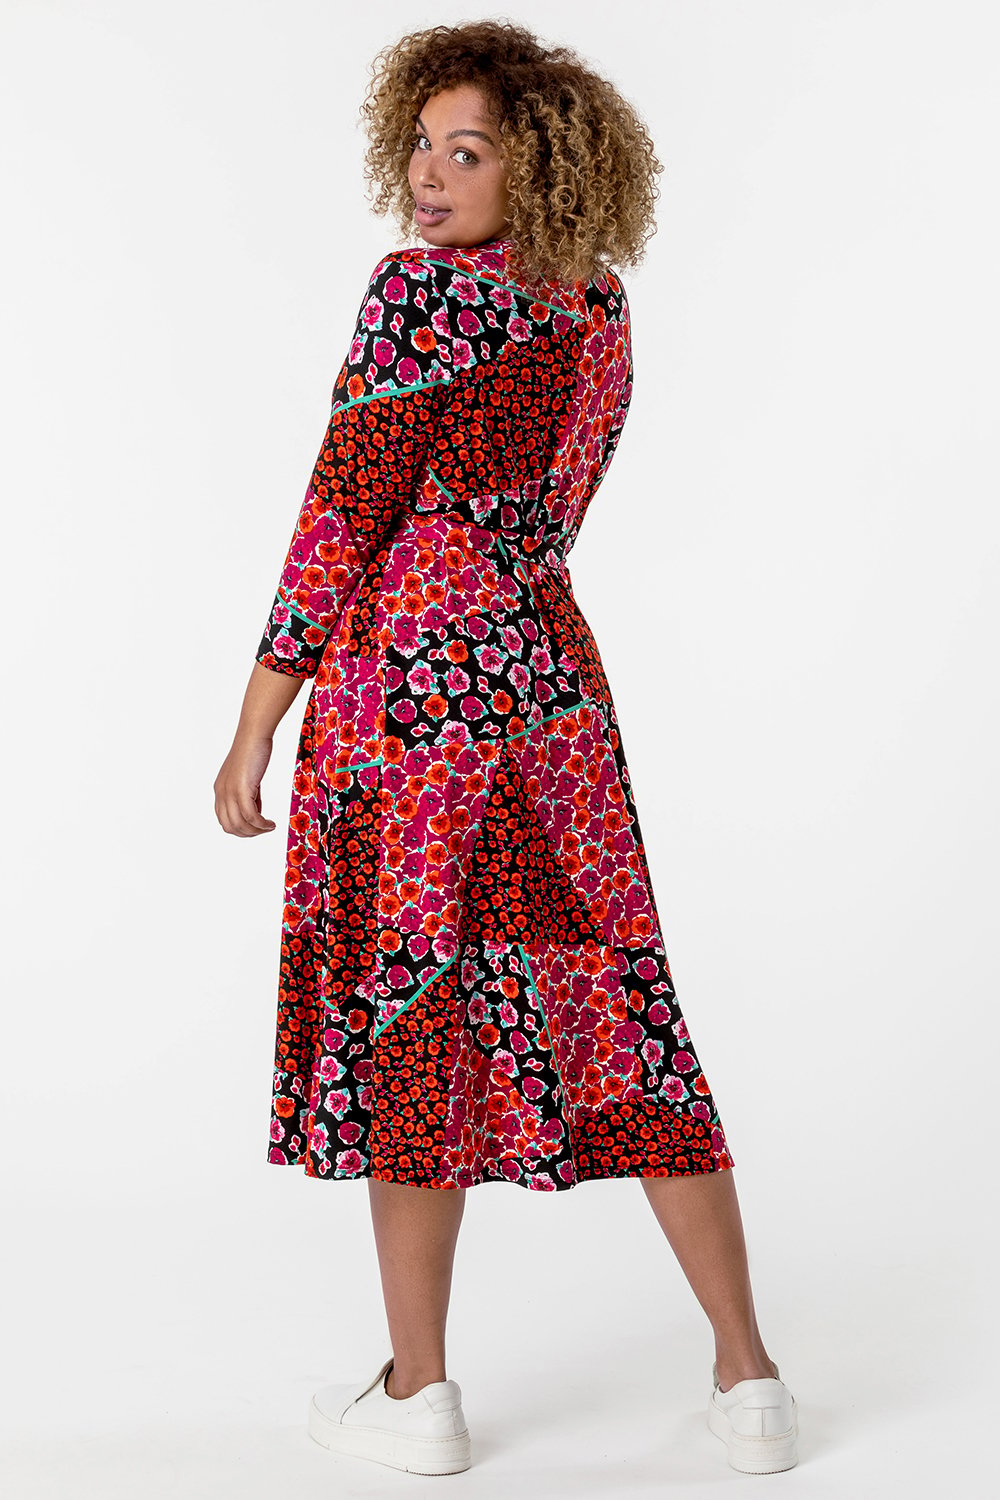 Red Curve Patchwork Floral Print Wrap Dress, Image 2 of 5